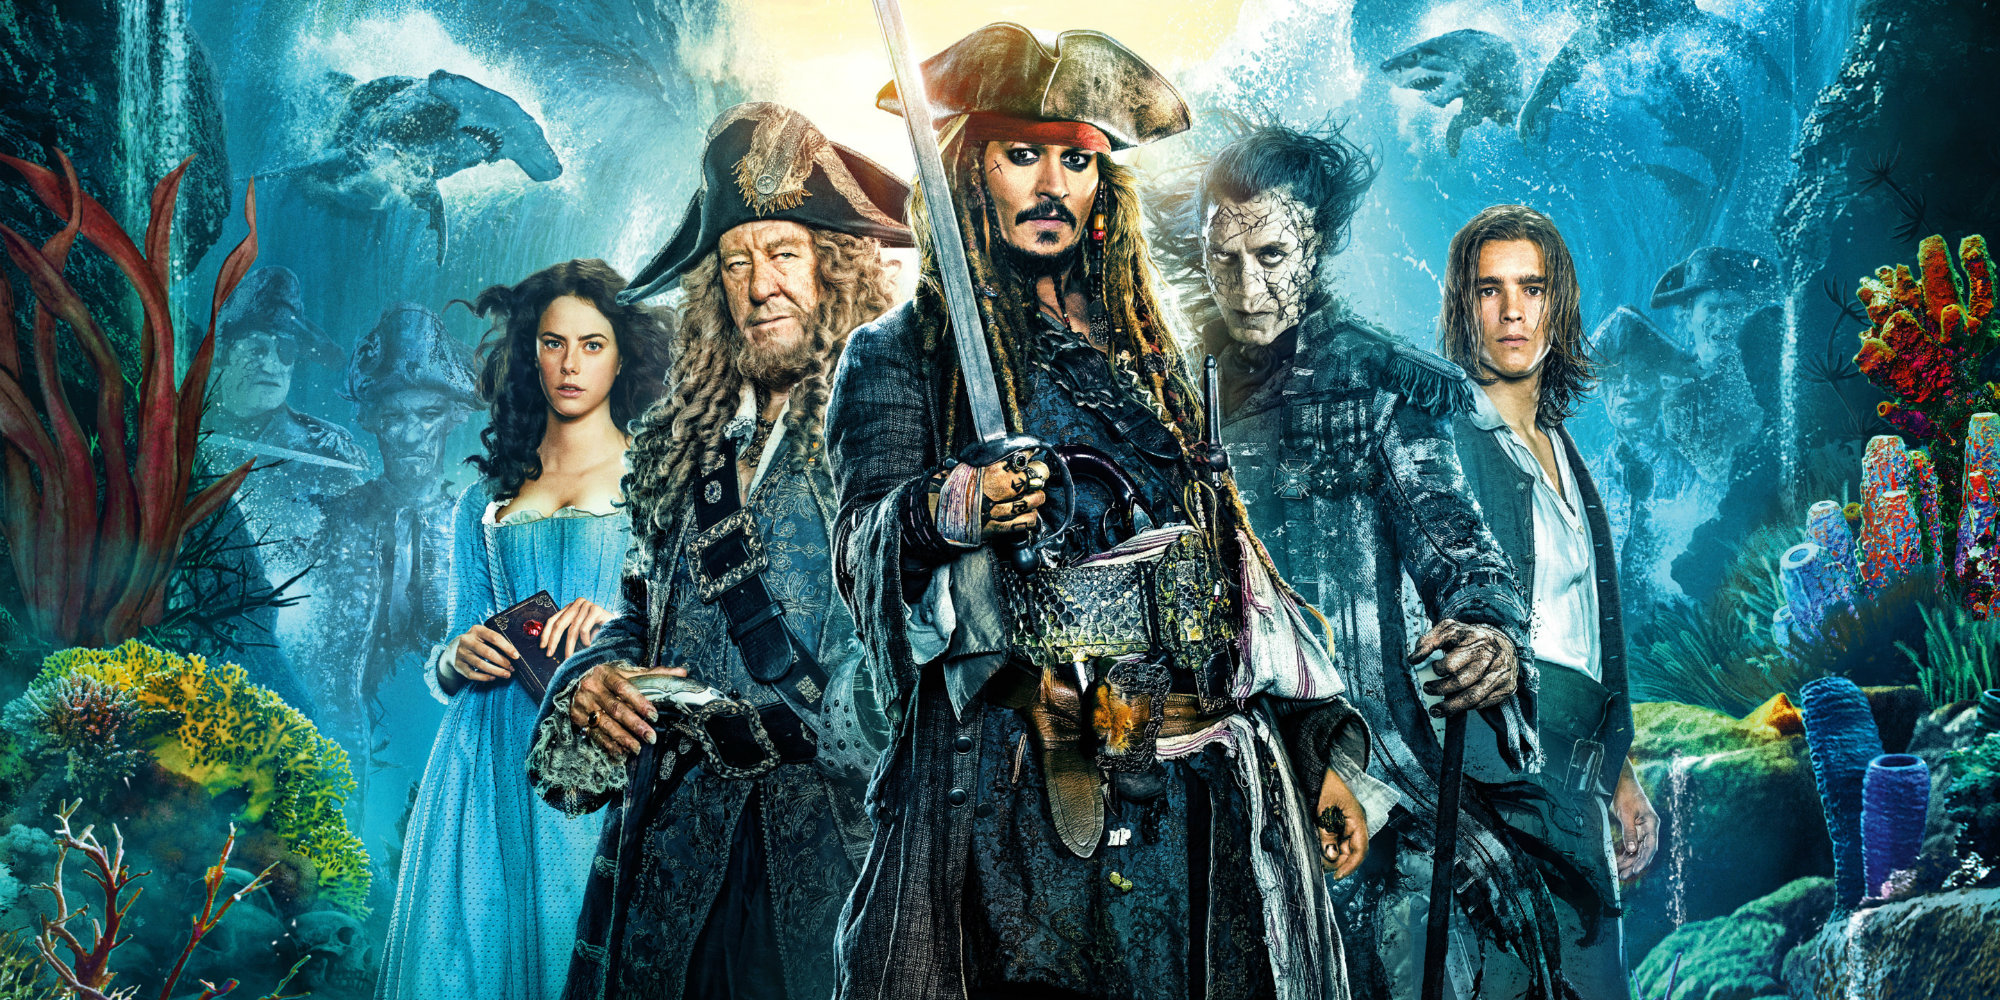 Hackers demand ransom from Disney over 'Pirates of the Caribbean 5'